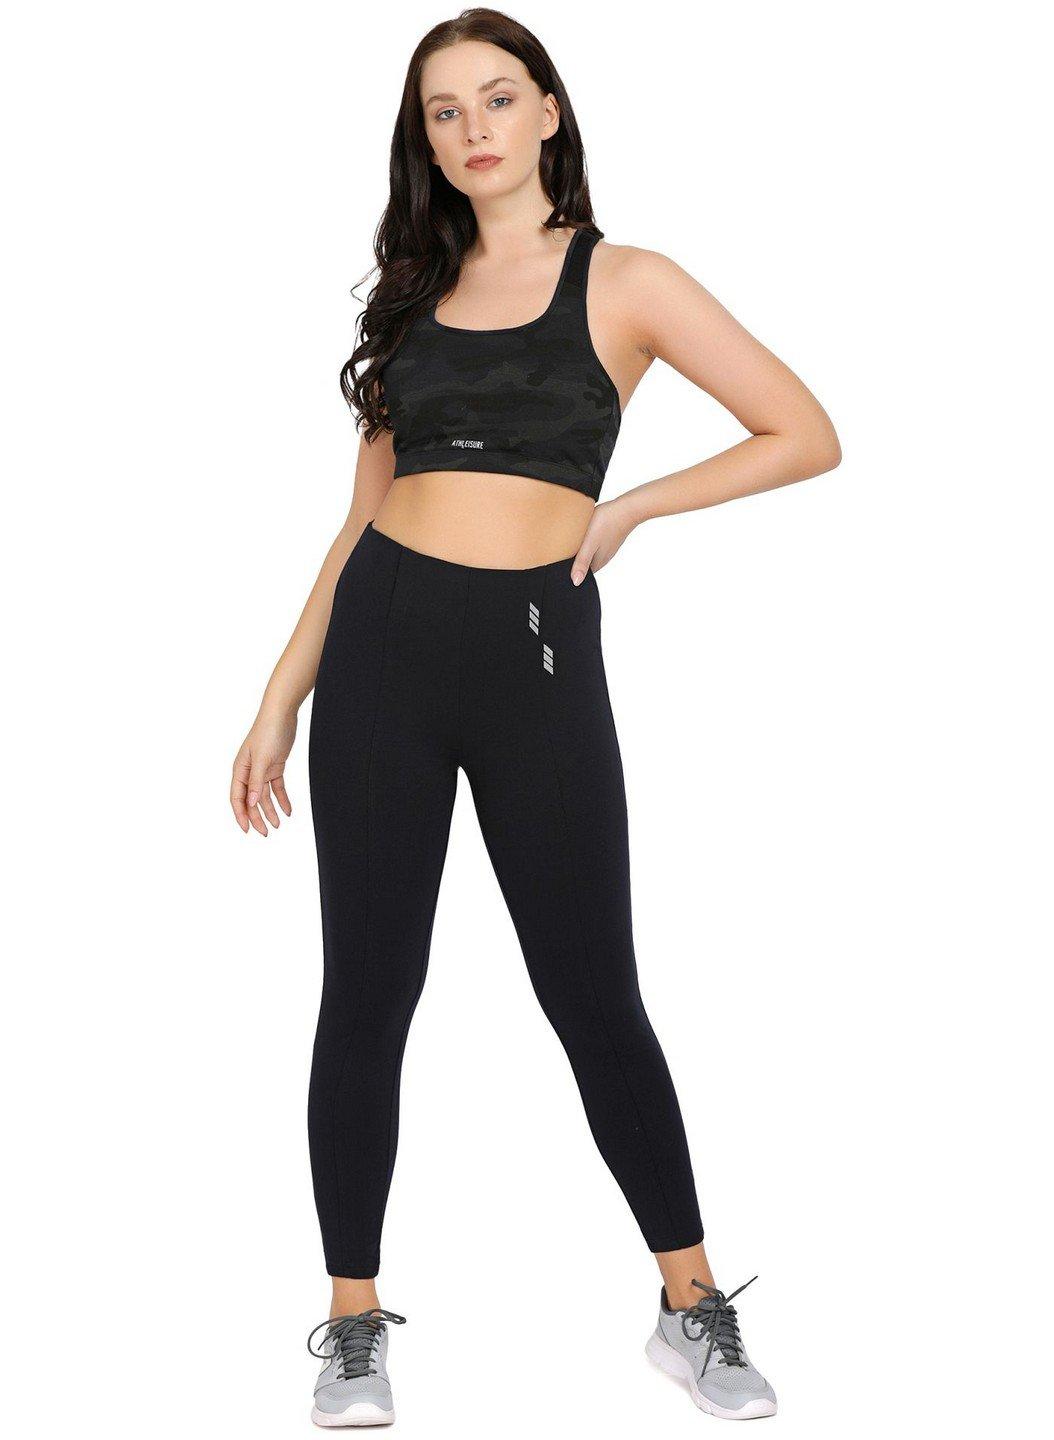 Lulus Womens Quick Dry Designer Leggings, Quarter Pants, Yoga Pants  Breathable And Stylish Athleisure Tight Compression Shorts Women From  Hoodie2388, $37.69 | DHgate.Com